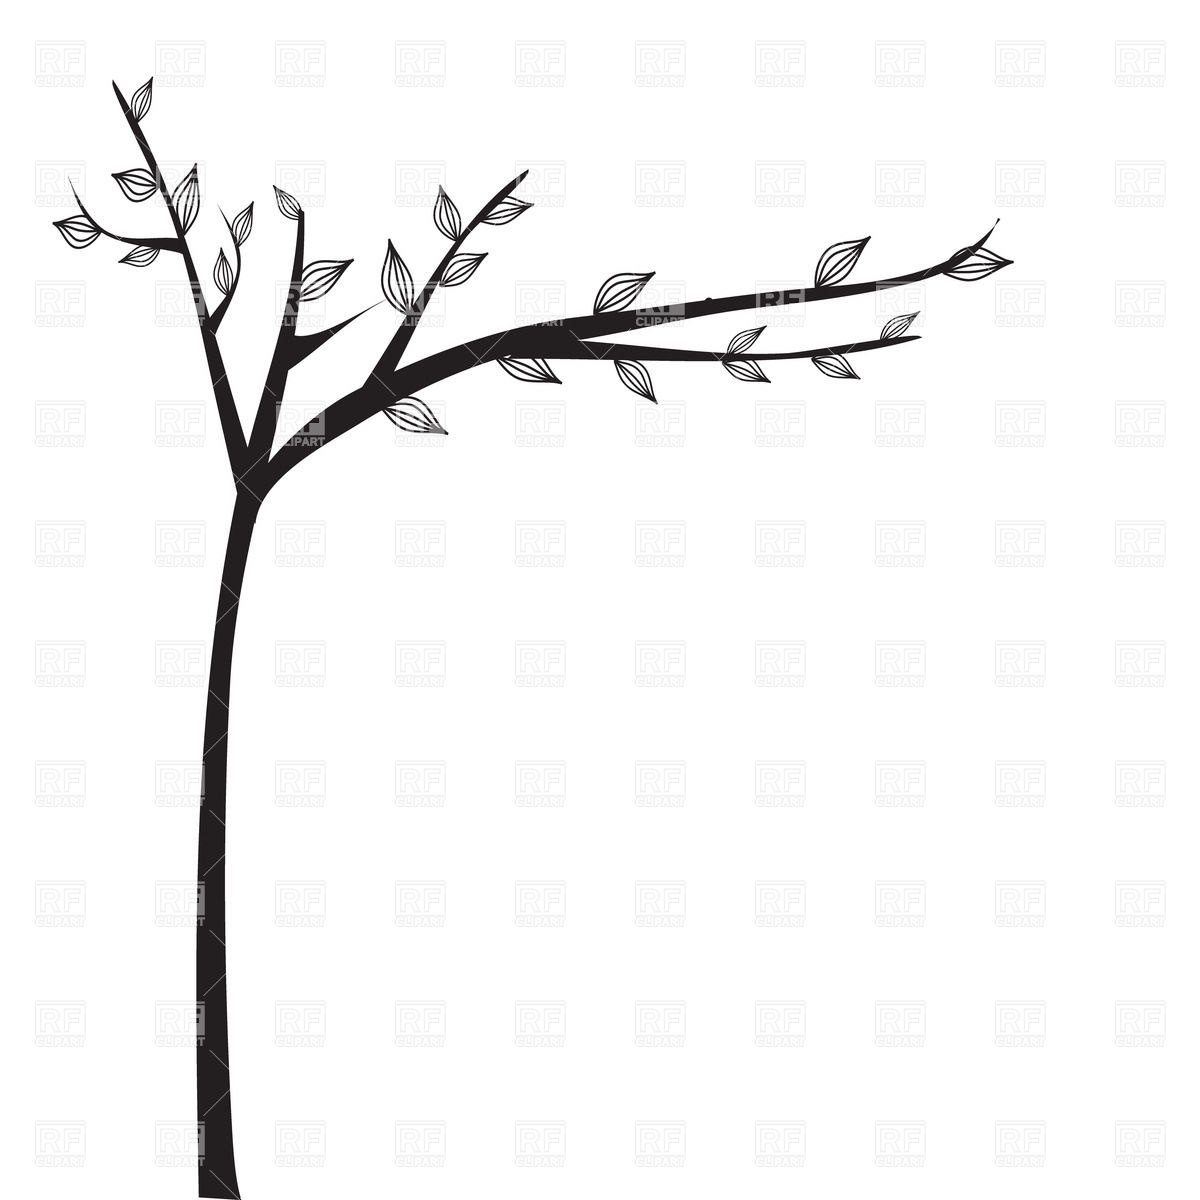     Black Tree Silhouette Download Royalty Free Vector Clipart  Eps